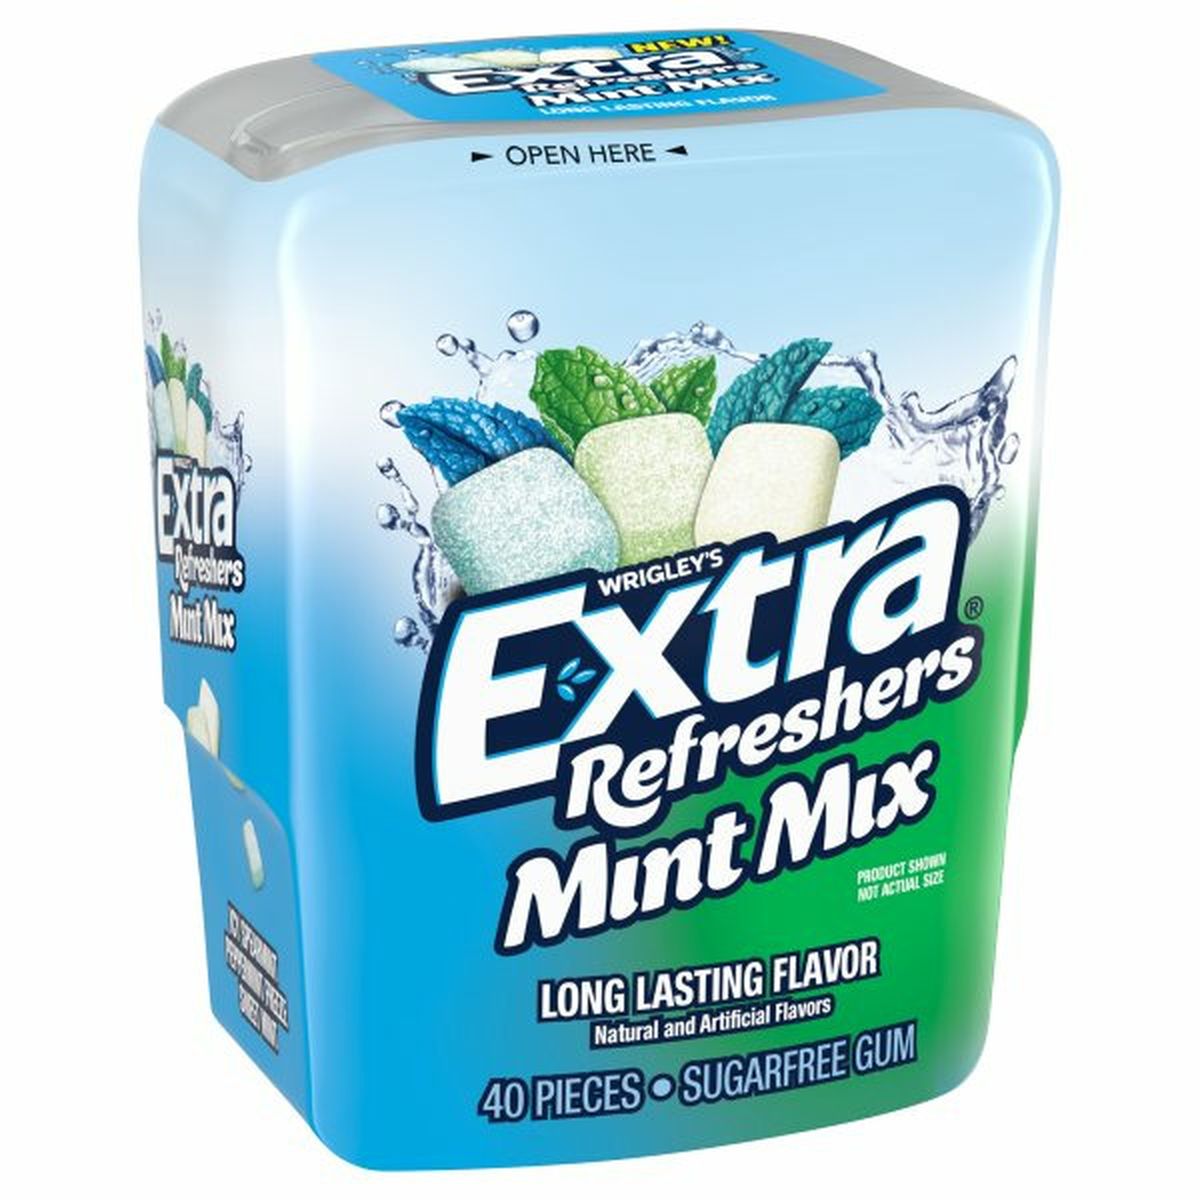 Calories in Extra Refreshers Refreshers Mint Mix Gum Piece Bottle